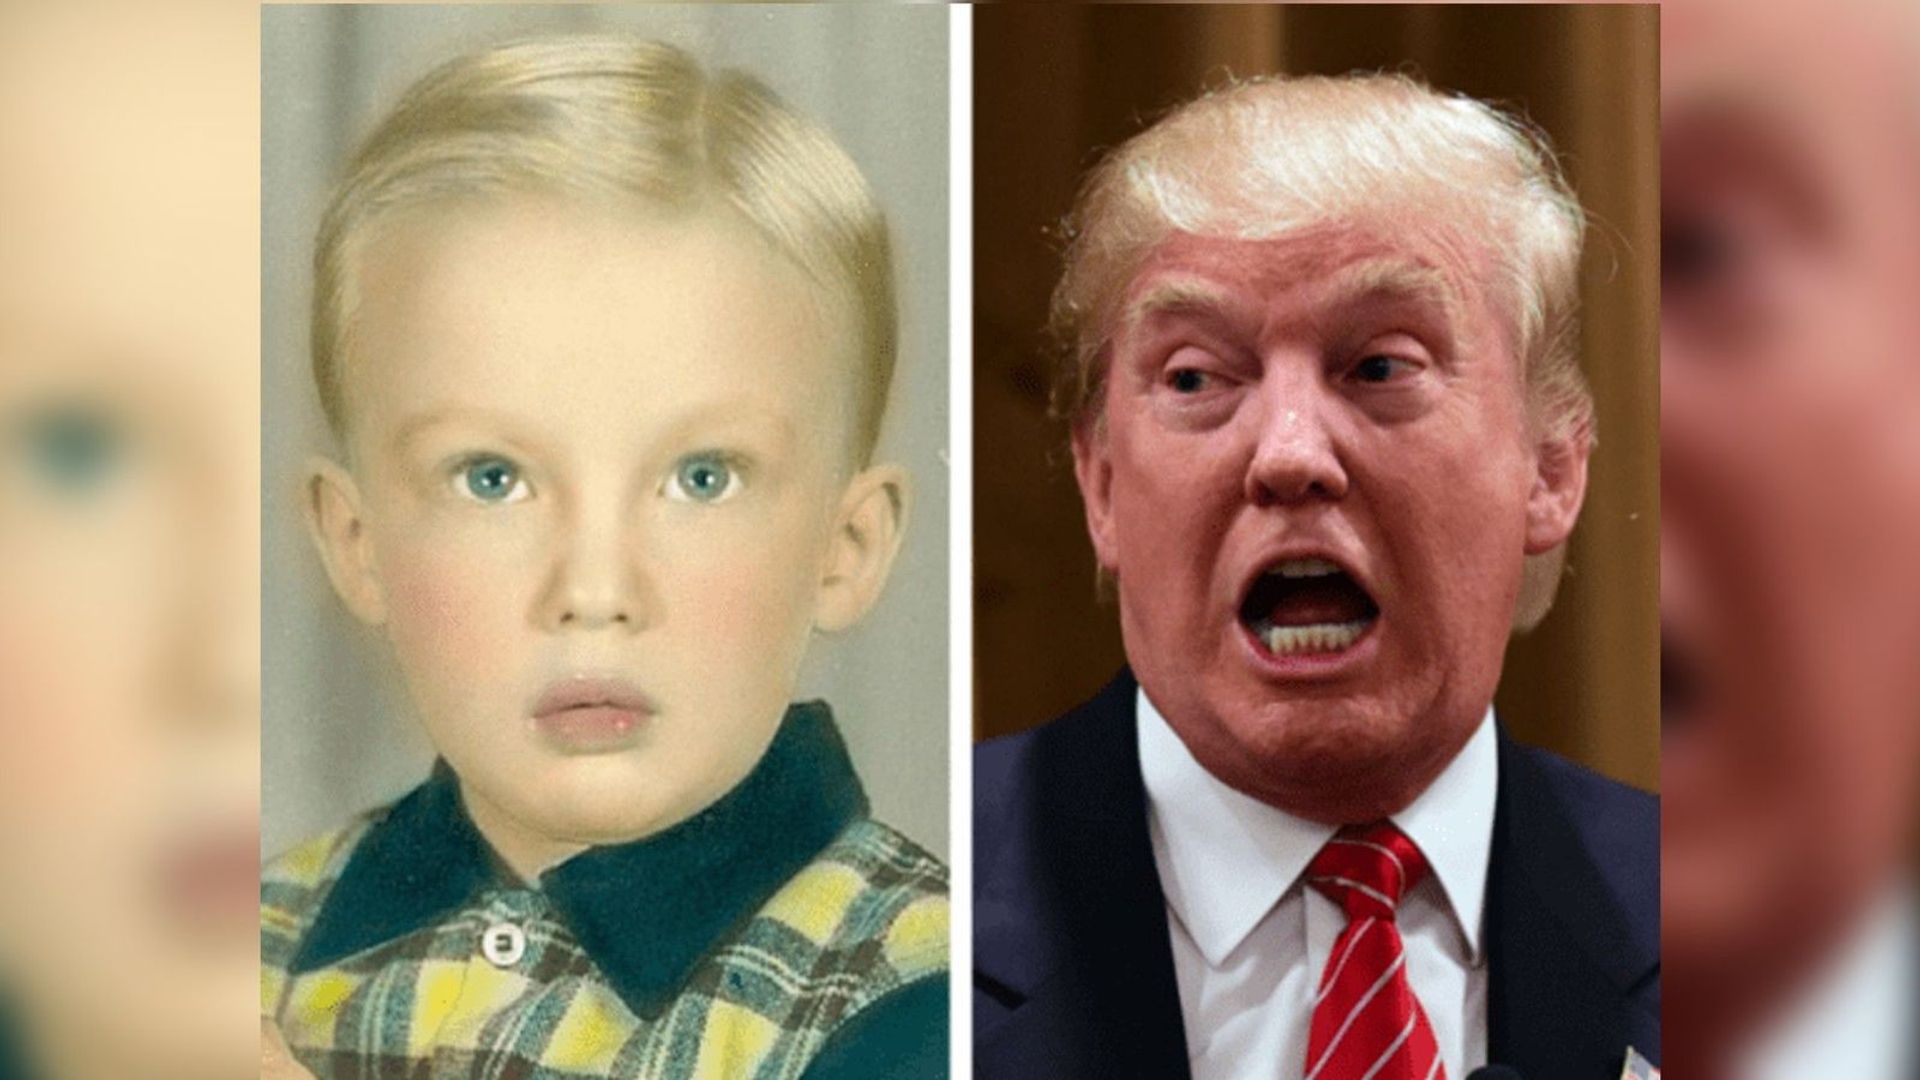 Donald Trump in childhood and now